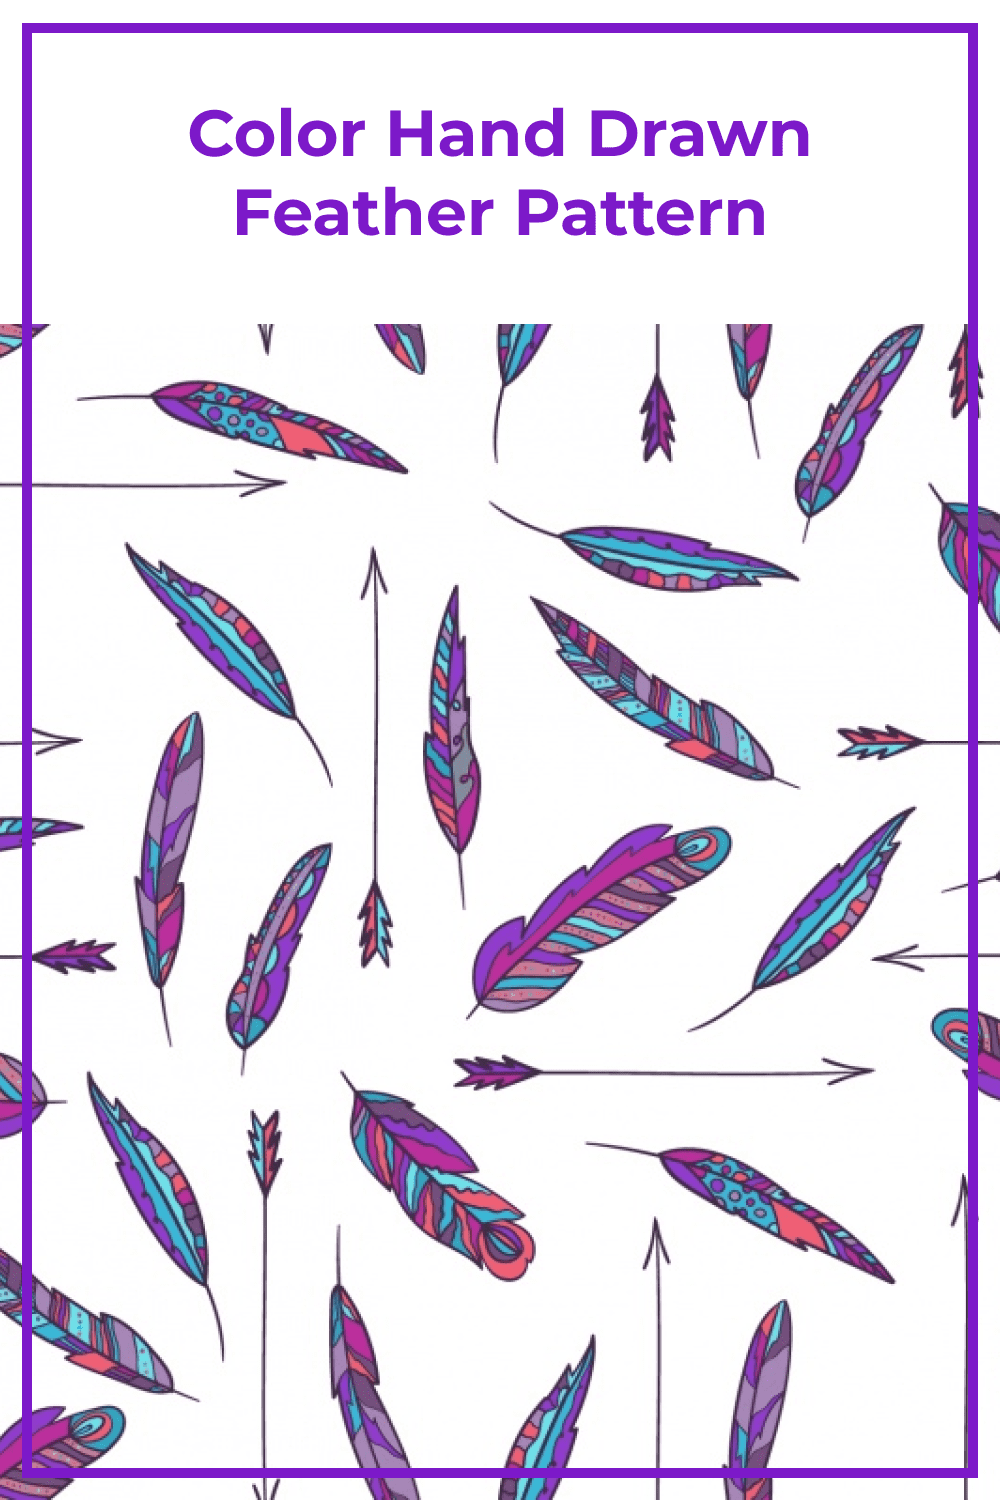 Color Hand Drawn Feather Pattern.